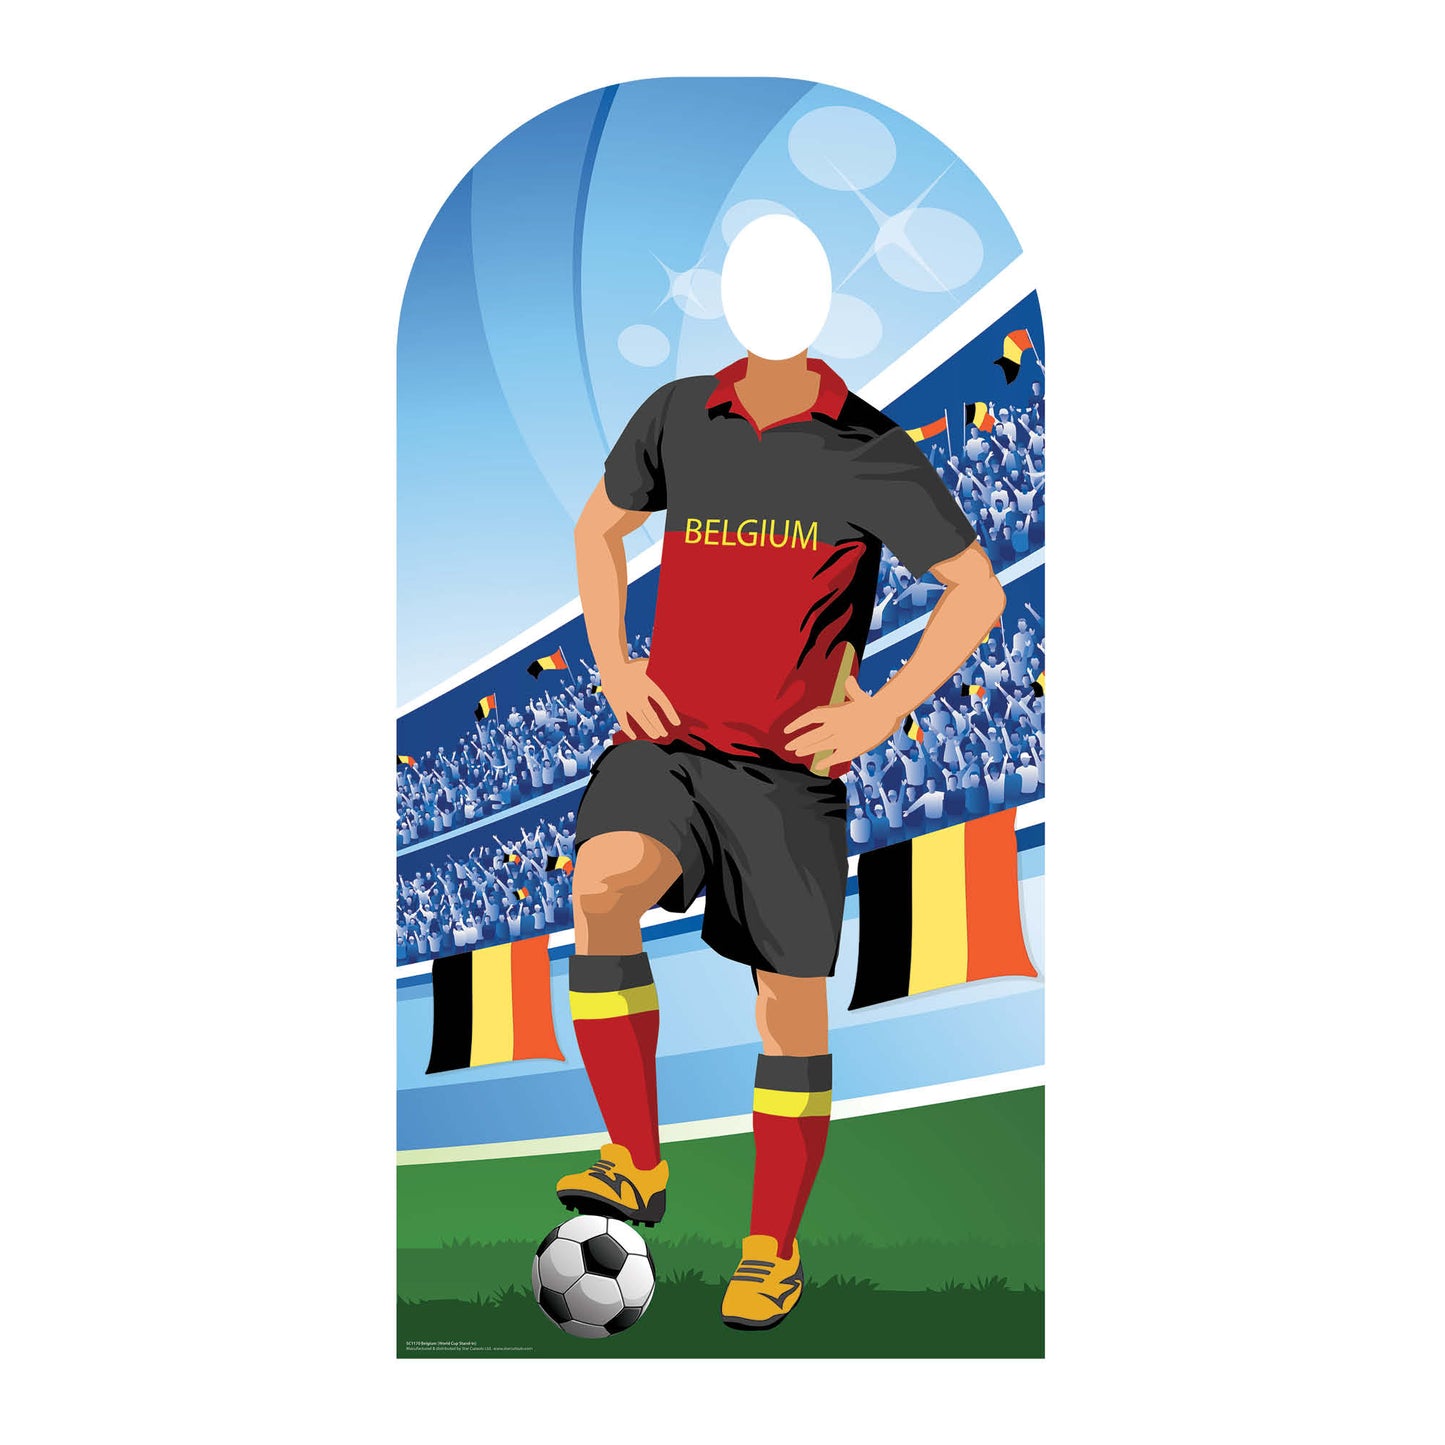 SC1170 Belgium World Cup Football Stand In Cardboard Cut Out Height 190cm